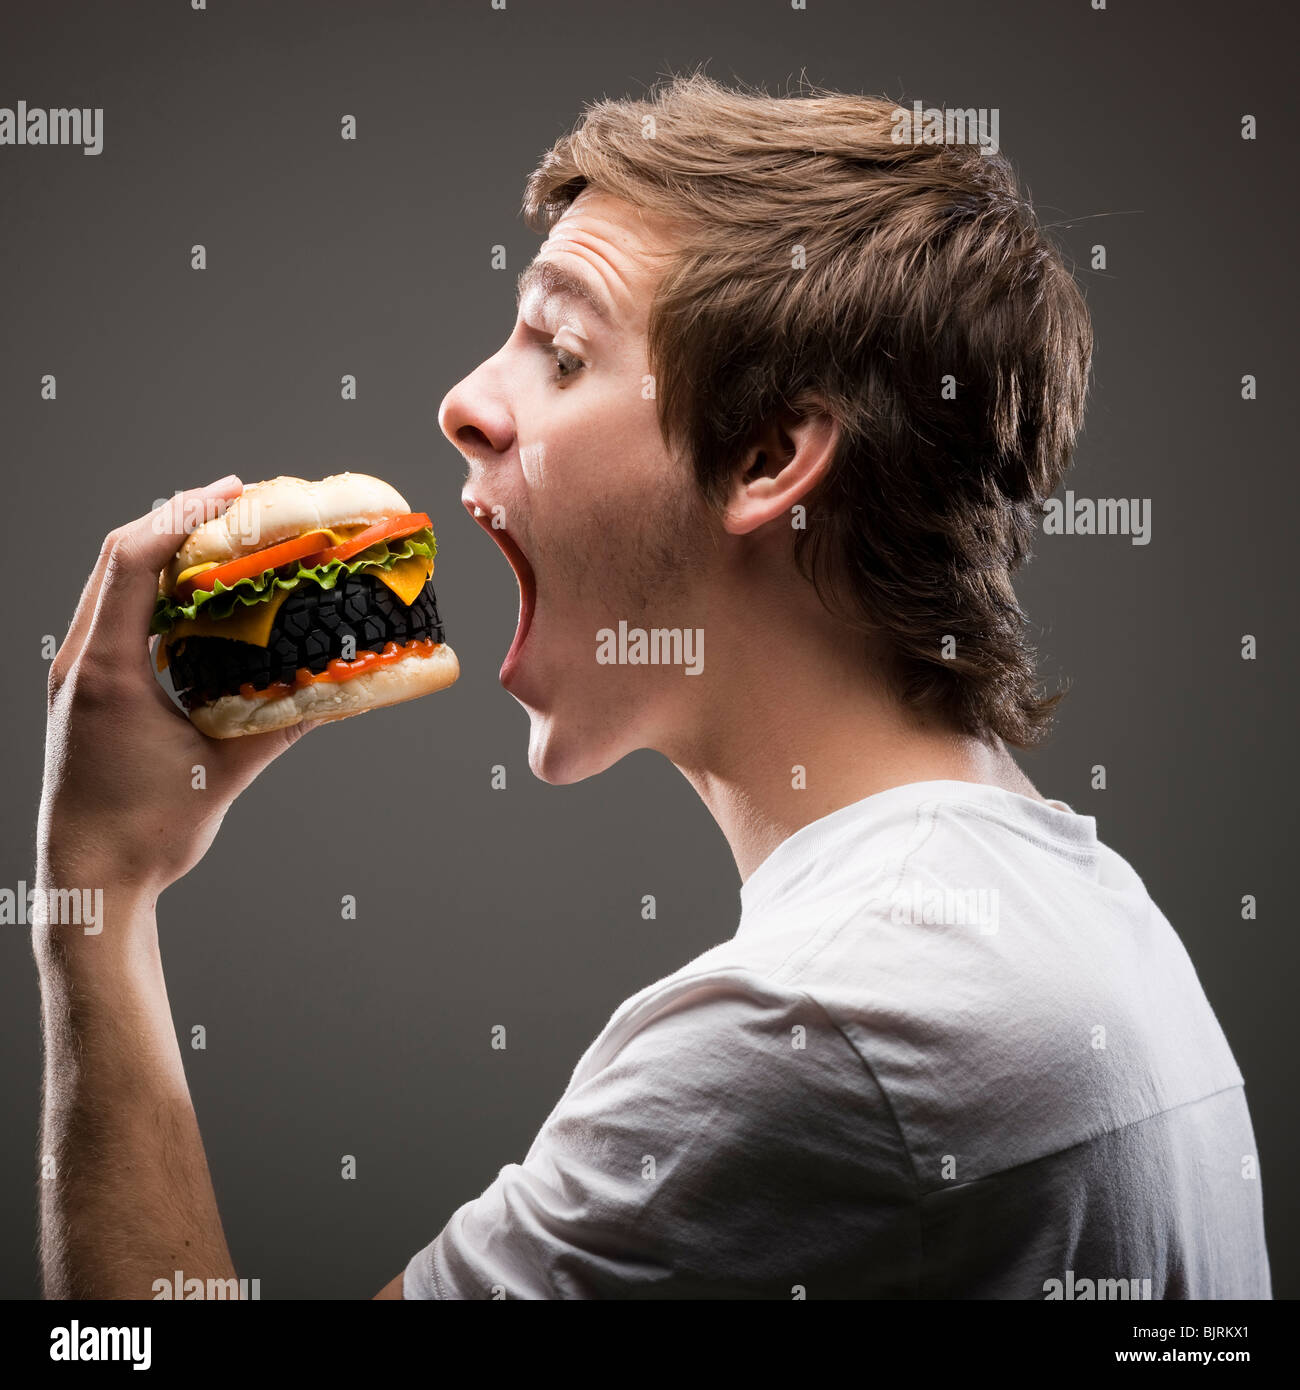 Side view of young man about to bite a tire hamburger Stock Photo